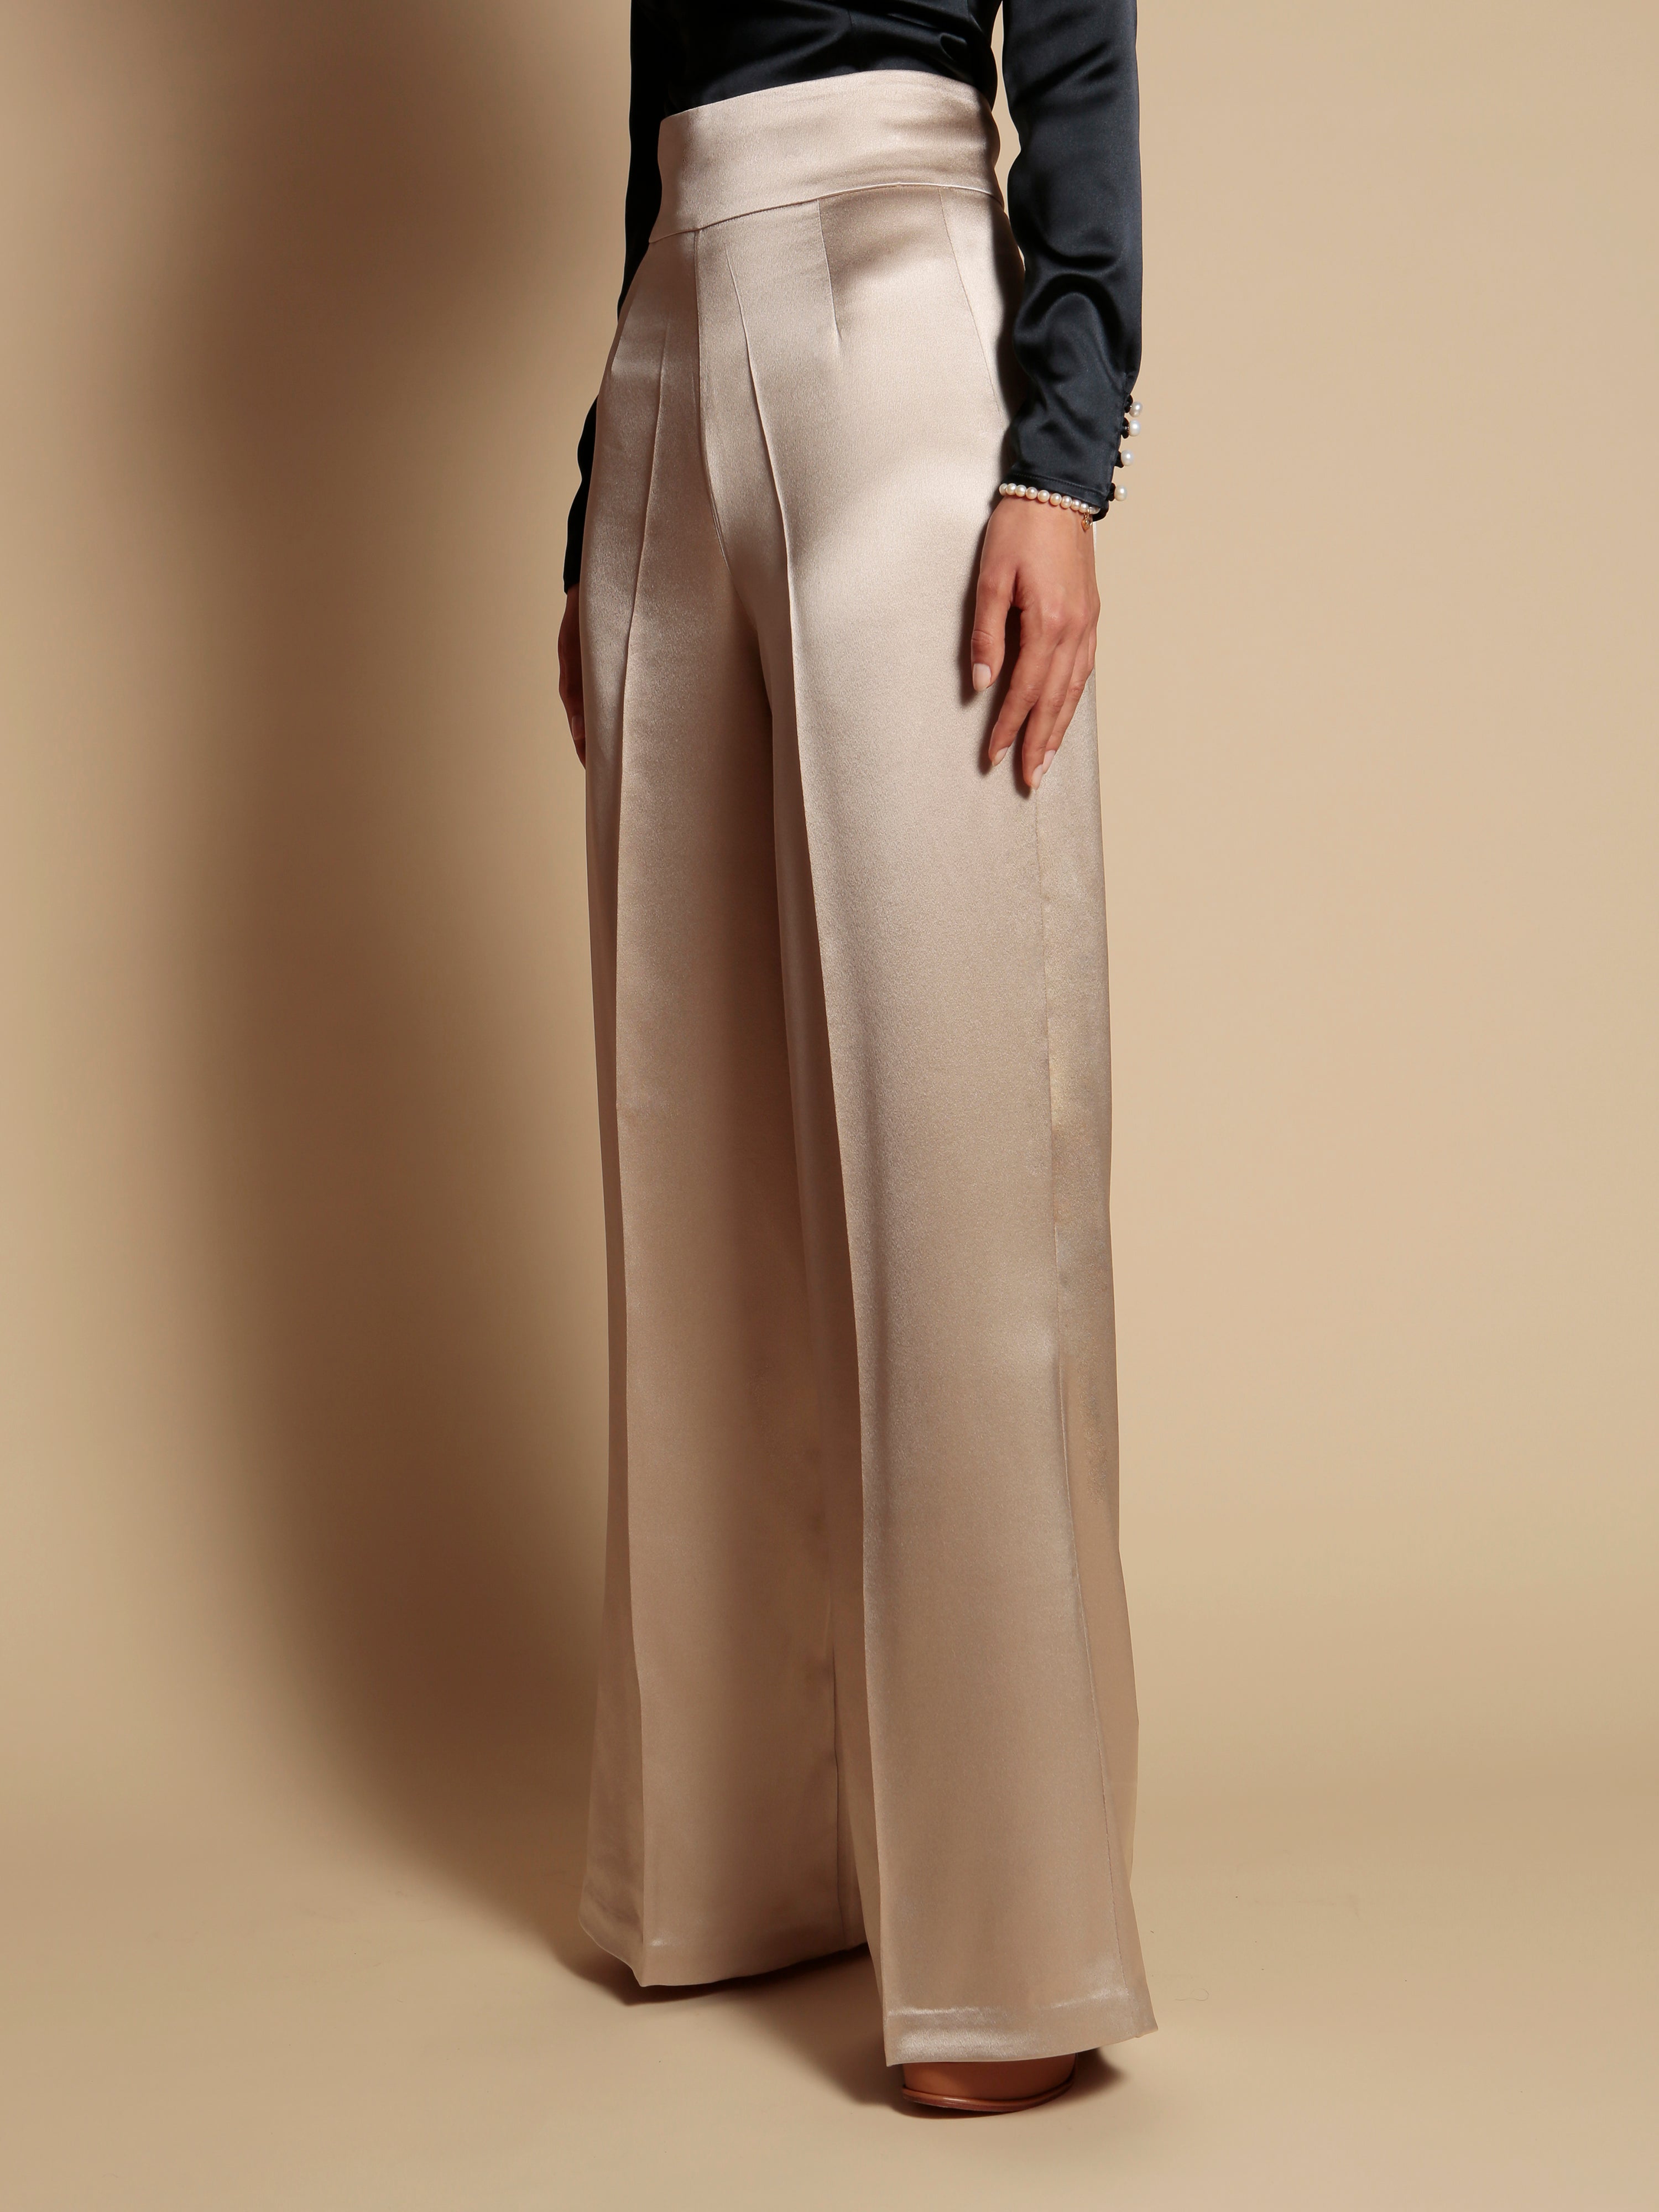 Details more than 71 silk trousers uk best - in.duhocakina